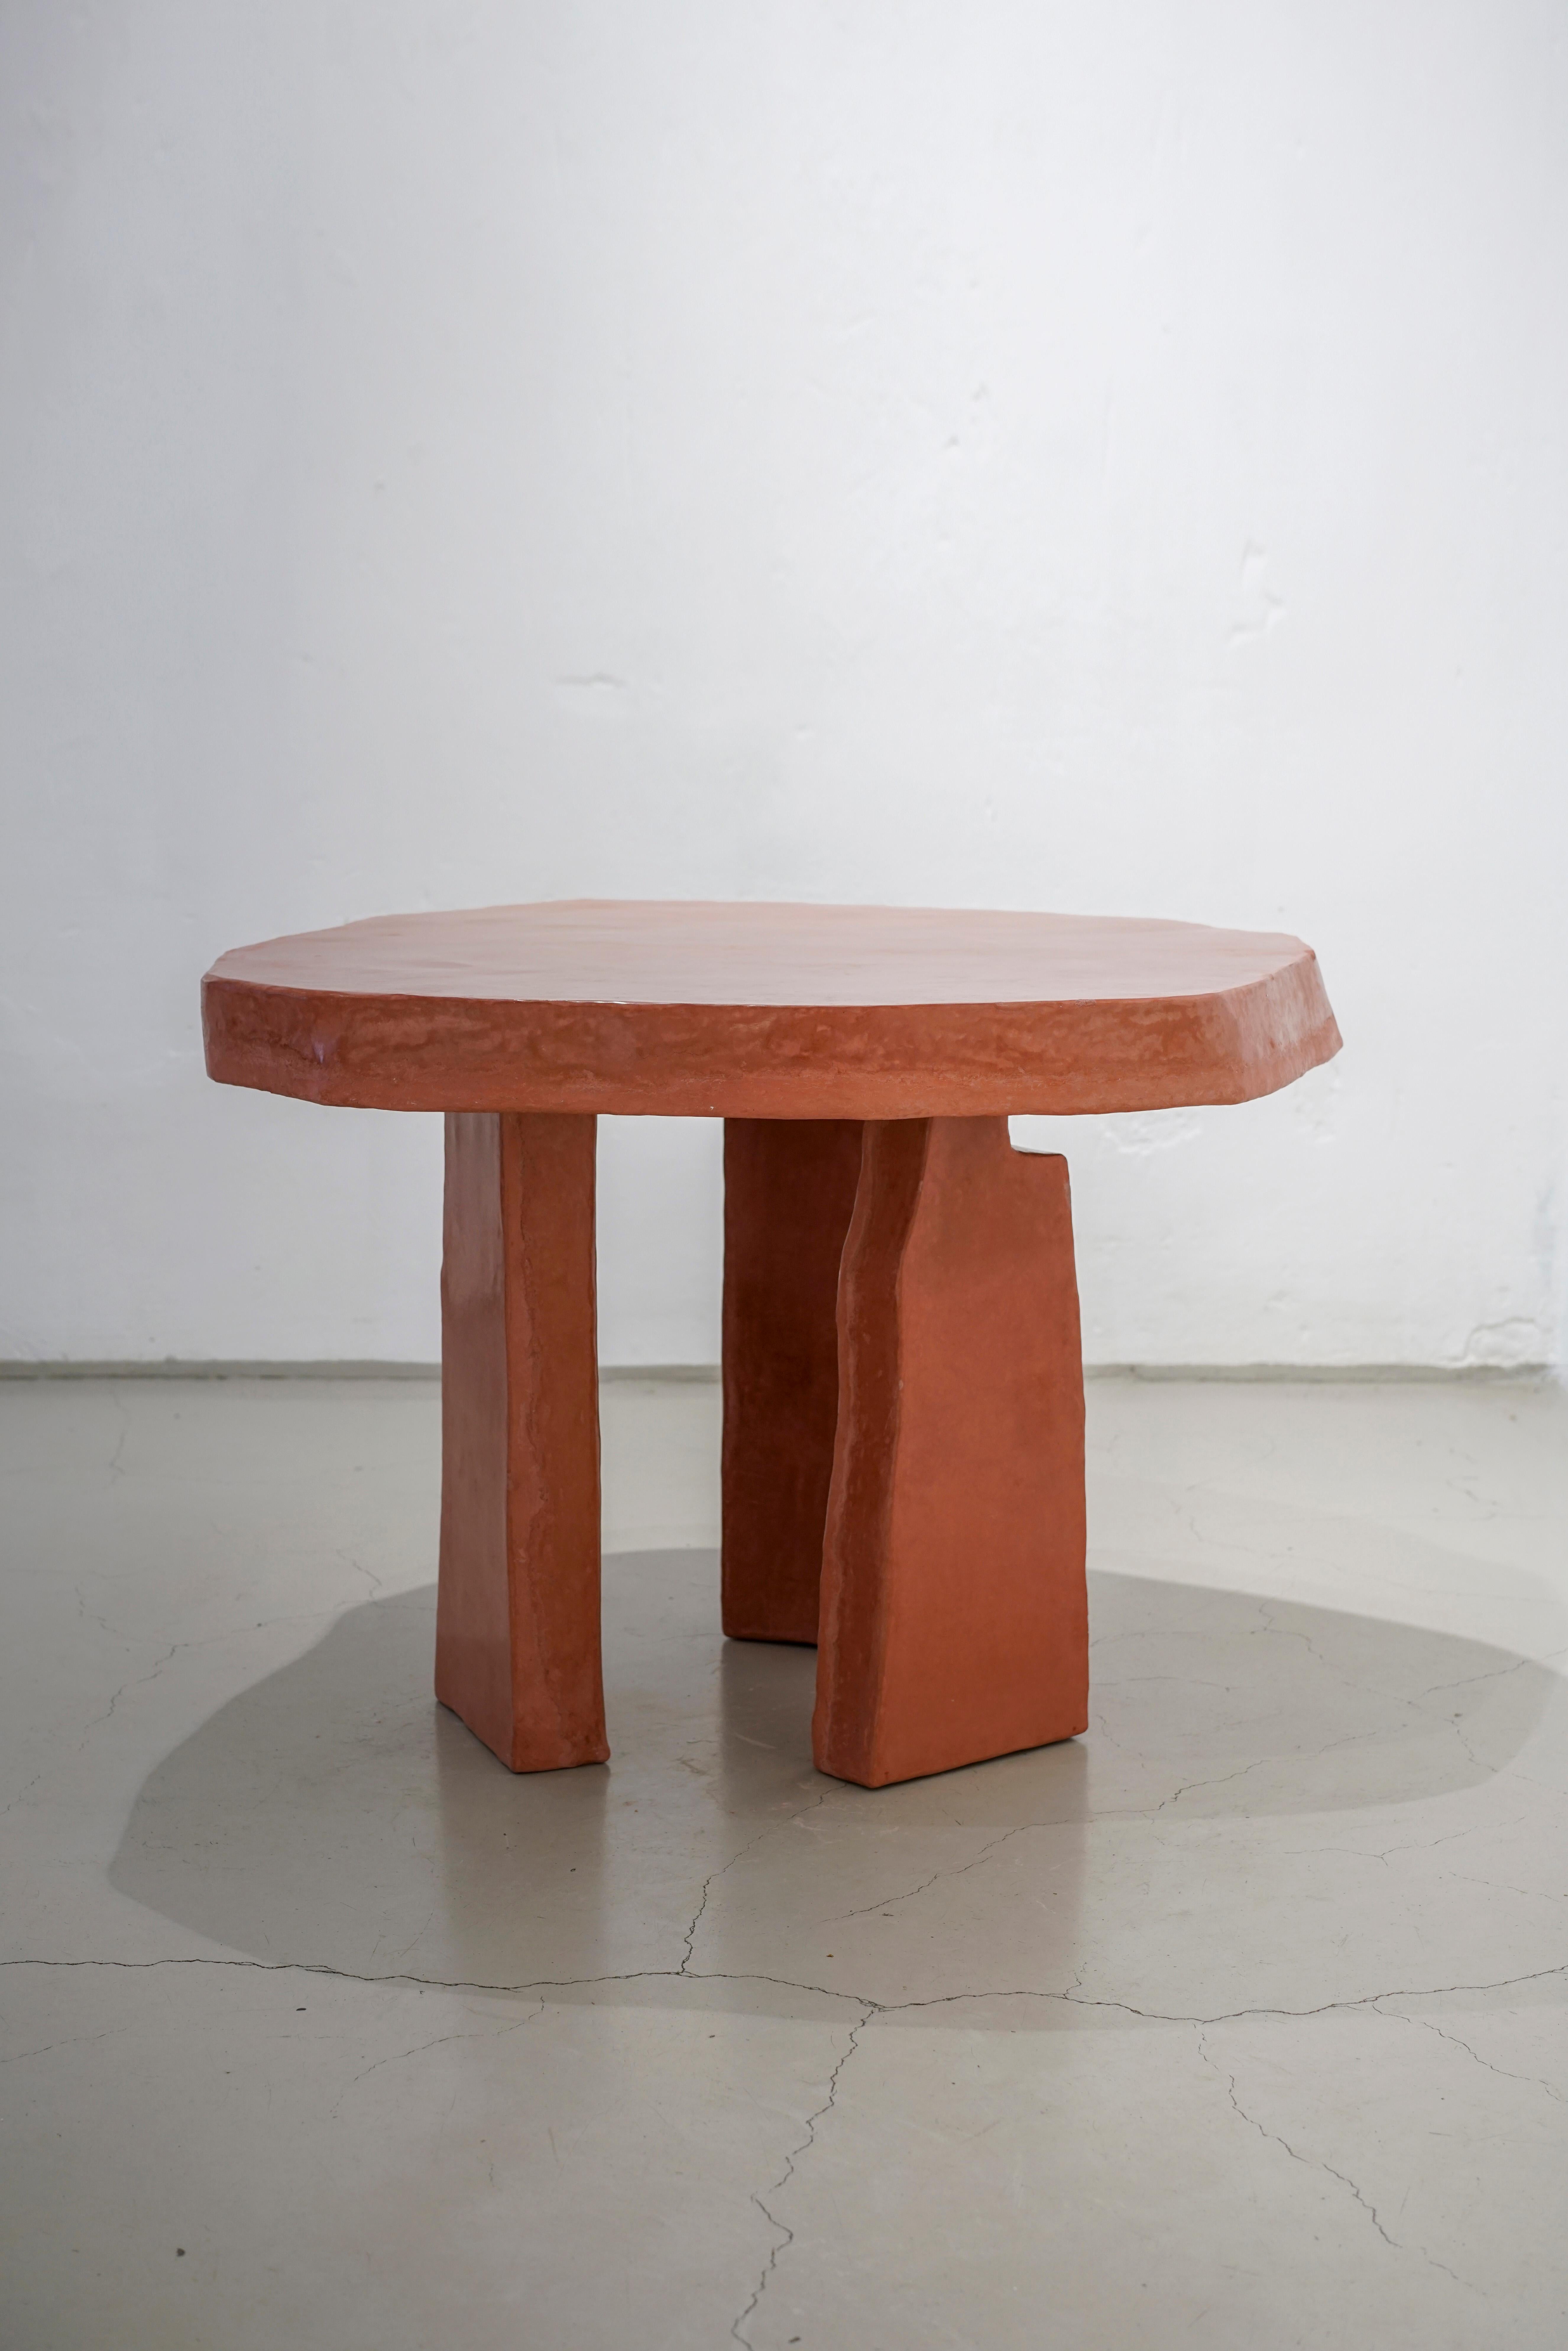 The monolithic-looking table is surprising through its unusual and raw aesthetic.The off-round top plate rests on three legs that look like unhewn stone blocks, reminding us of the typical dolmen shape. Aerated concrete builds the core of the table